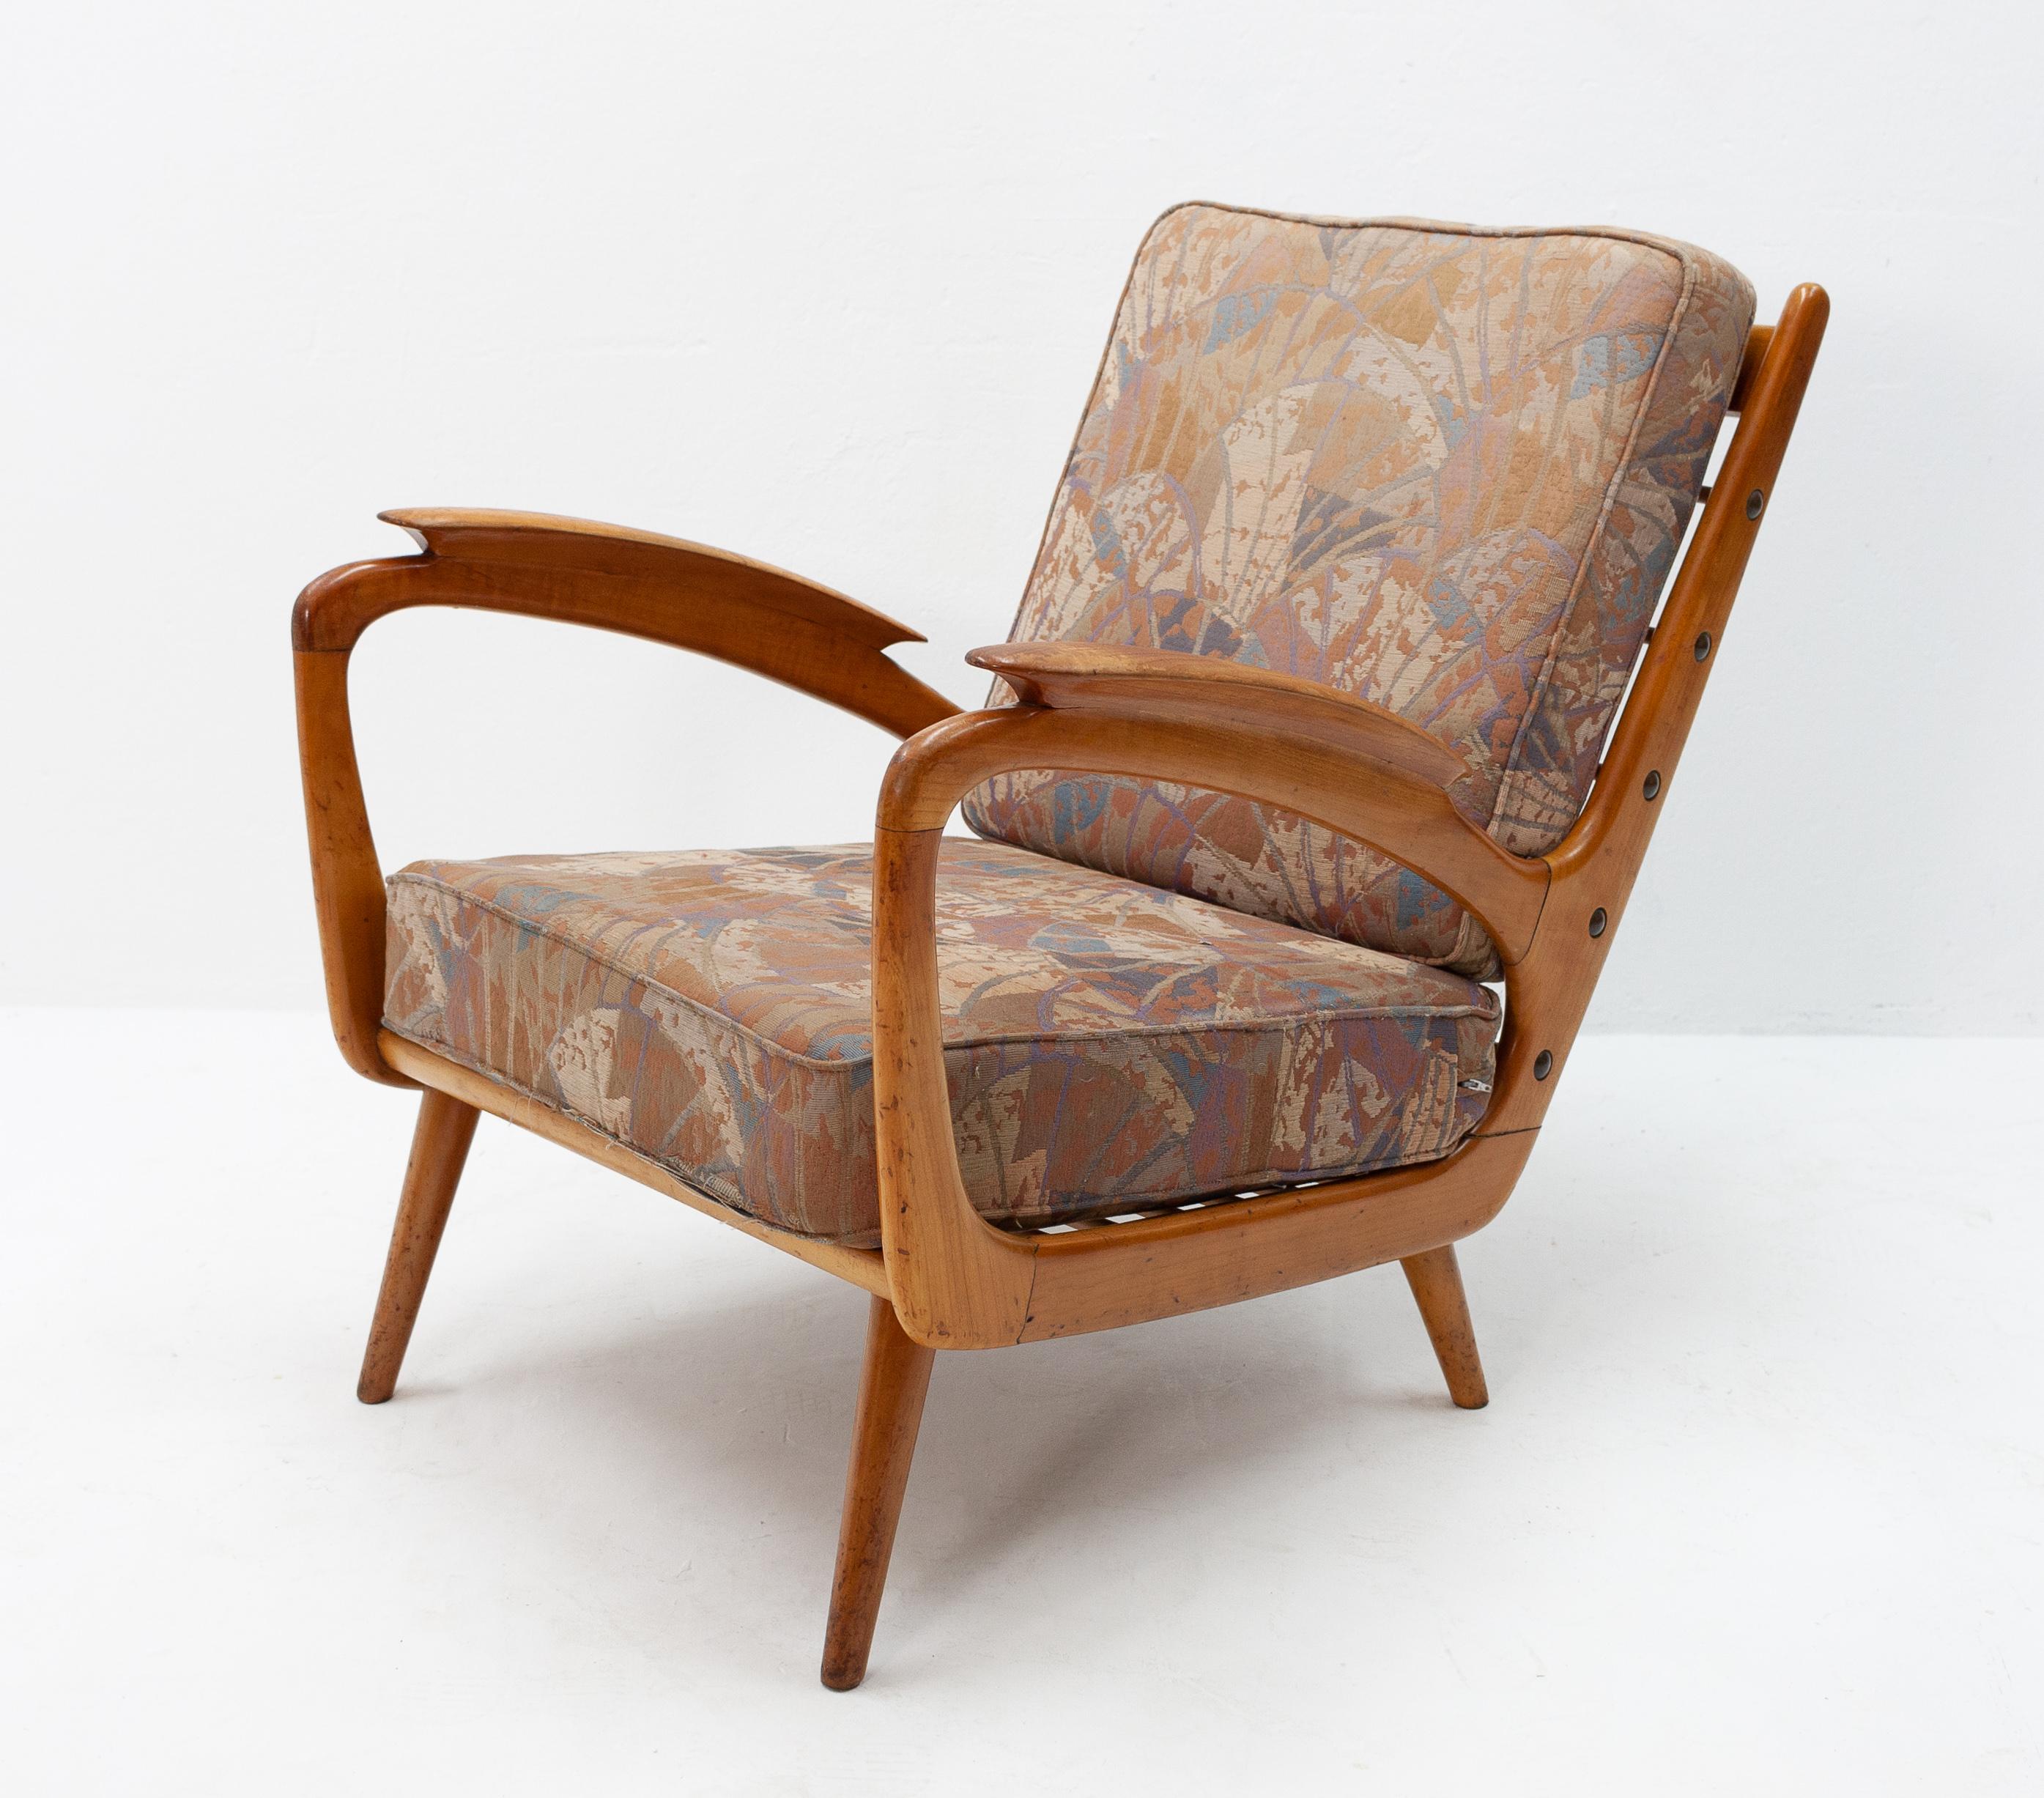 Superb lounge chair designed by AJ Mesker Interior Decoration, the Hague 1940s. 
This firm was taken over by Pander furniture in the 1950s. Of this model chair I have found no other one, but there is a set of different Mesker chairs in the Peace